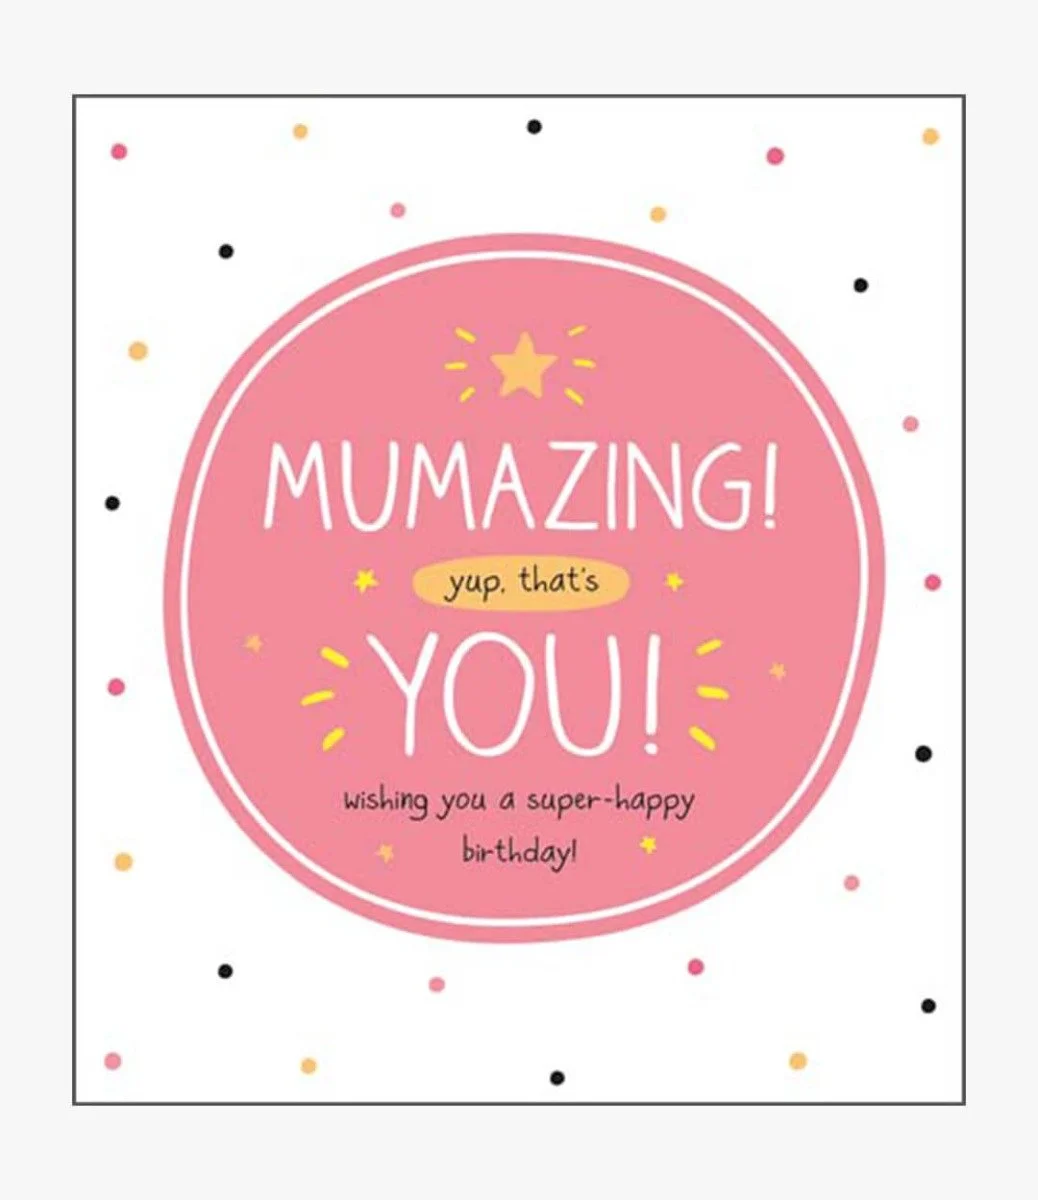 Mumazing Yup, That's You Greeting Card by Happy Jackson